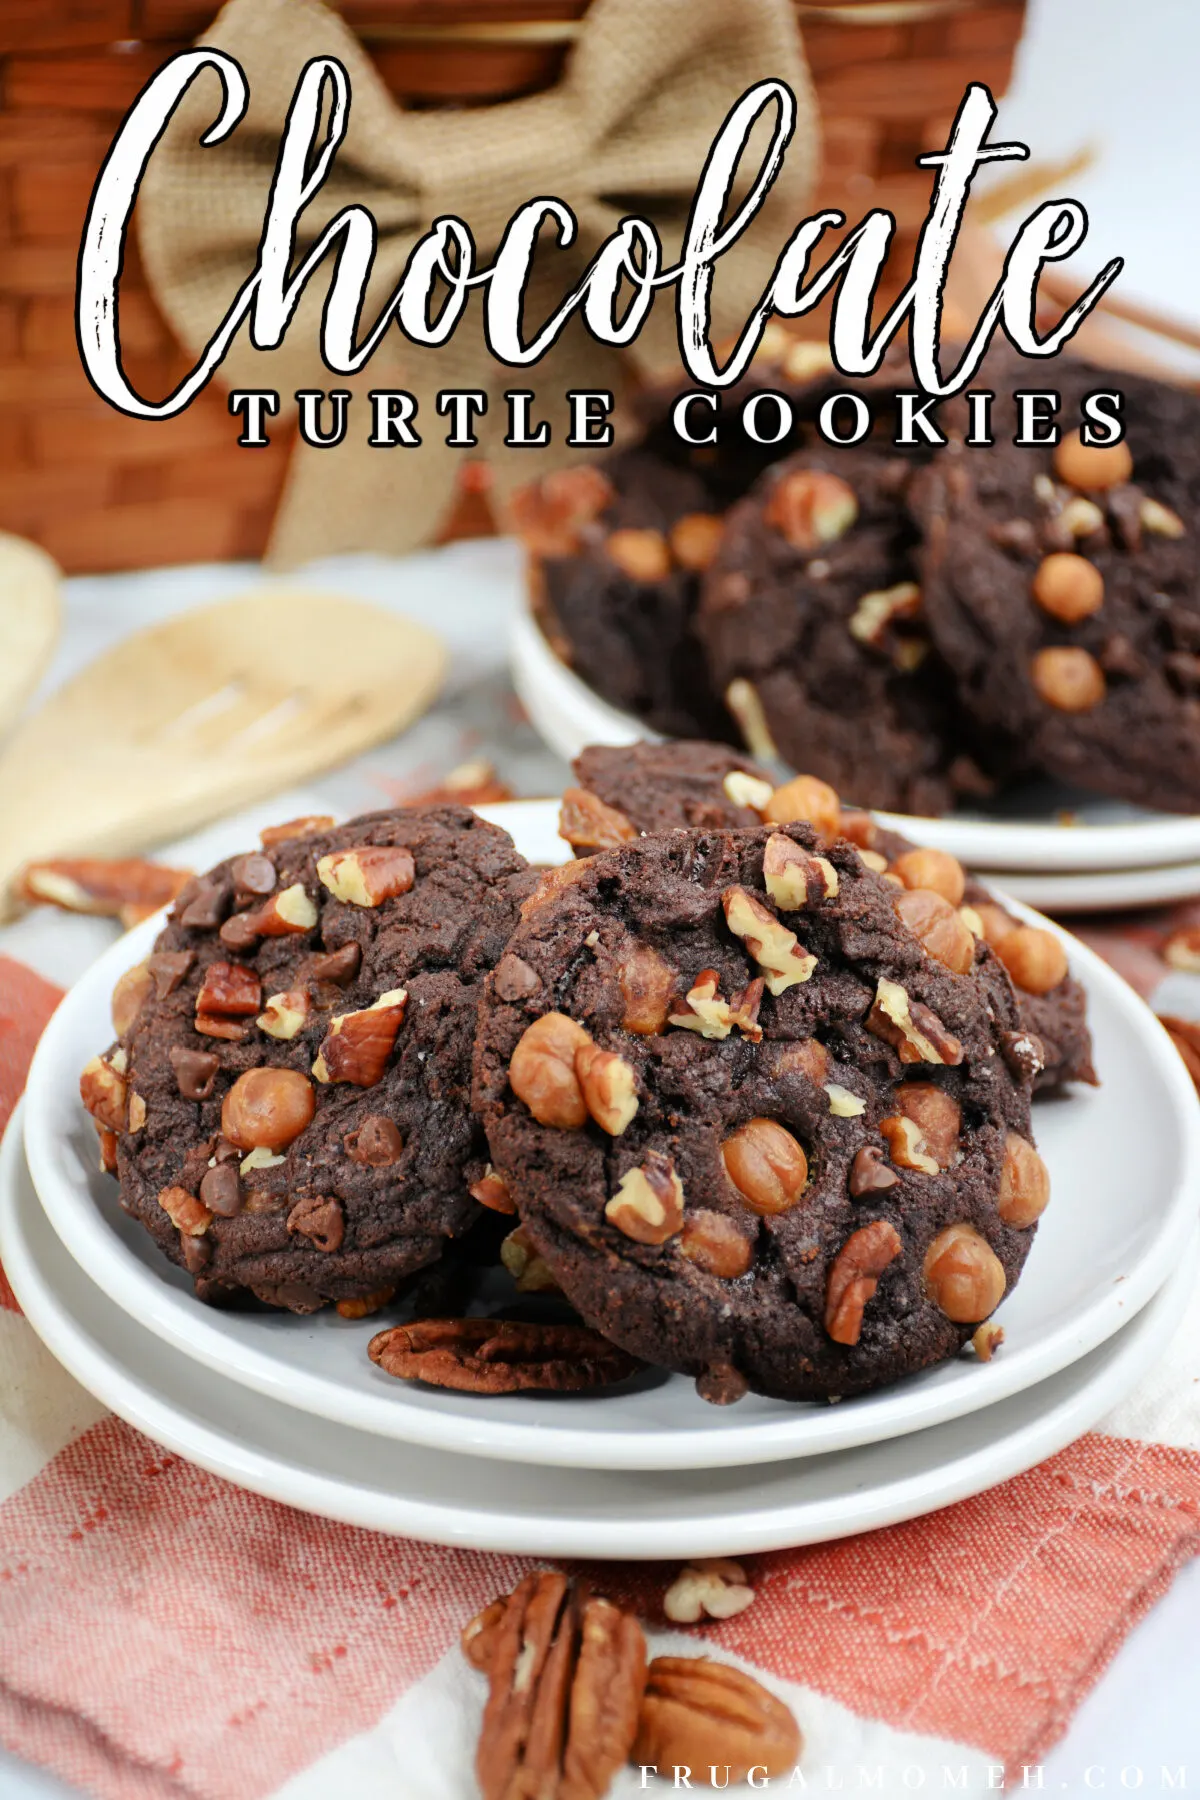 This recipe for chocolate turtle cookies is full of chocolate, caramel and pecan goodness! Easy to make and fun to eat cookie recipe.